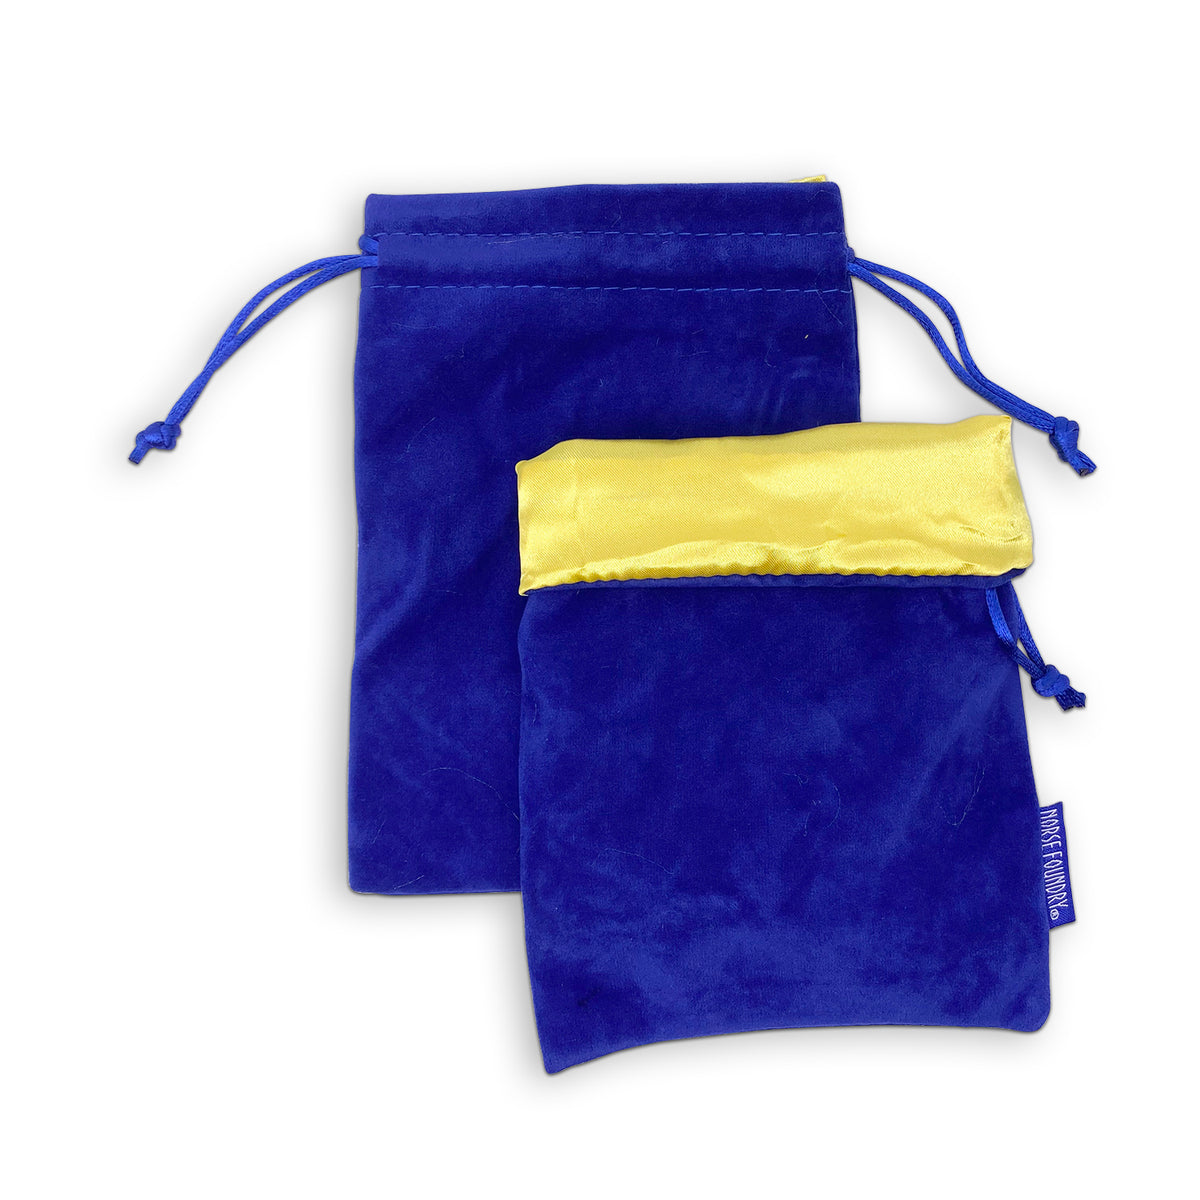 Blue/Yellow Dice Bag 5 x 7″ Velvet with Reinforced Treated Satin